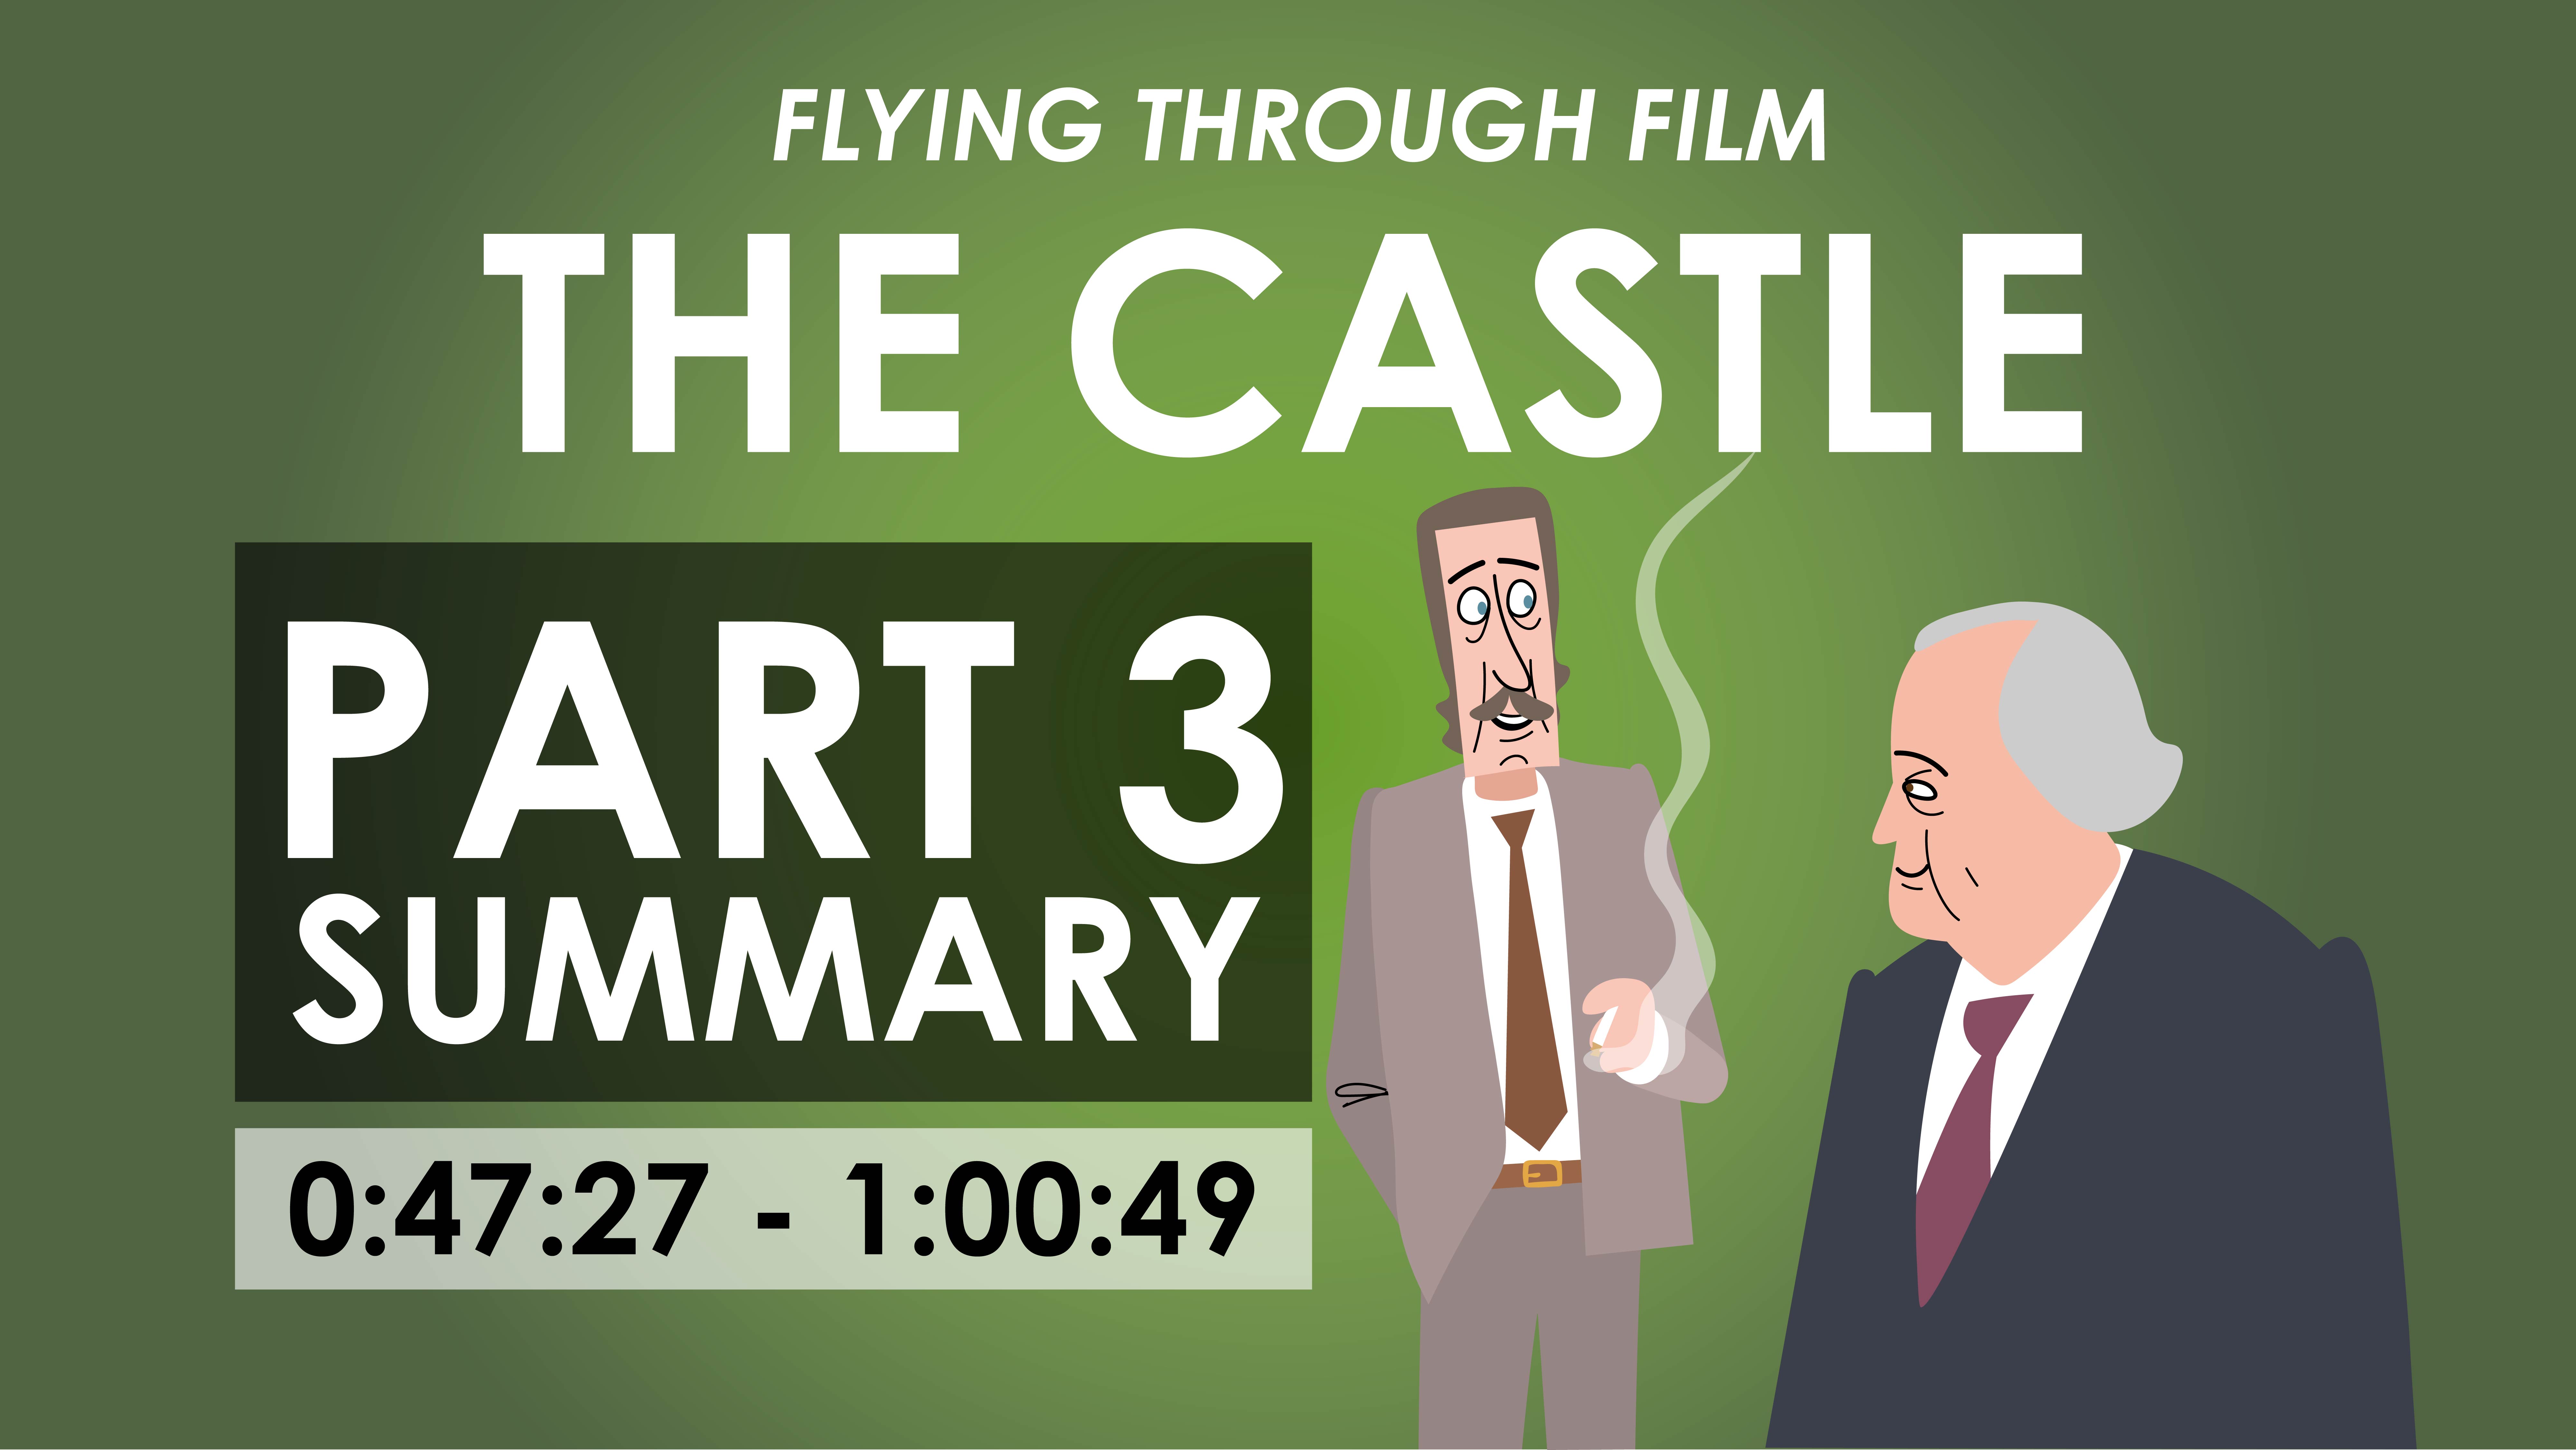 The Castle - Part 3 Summary (0:47:27-1:00:49) - Flying Through Film Series